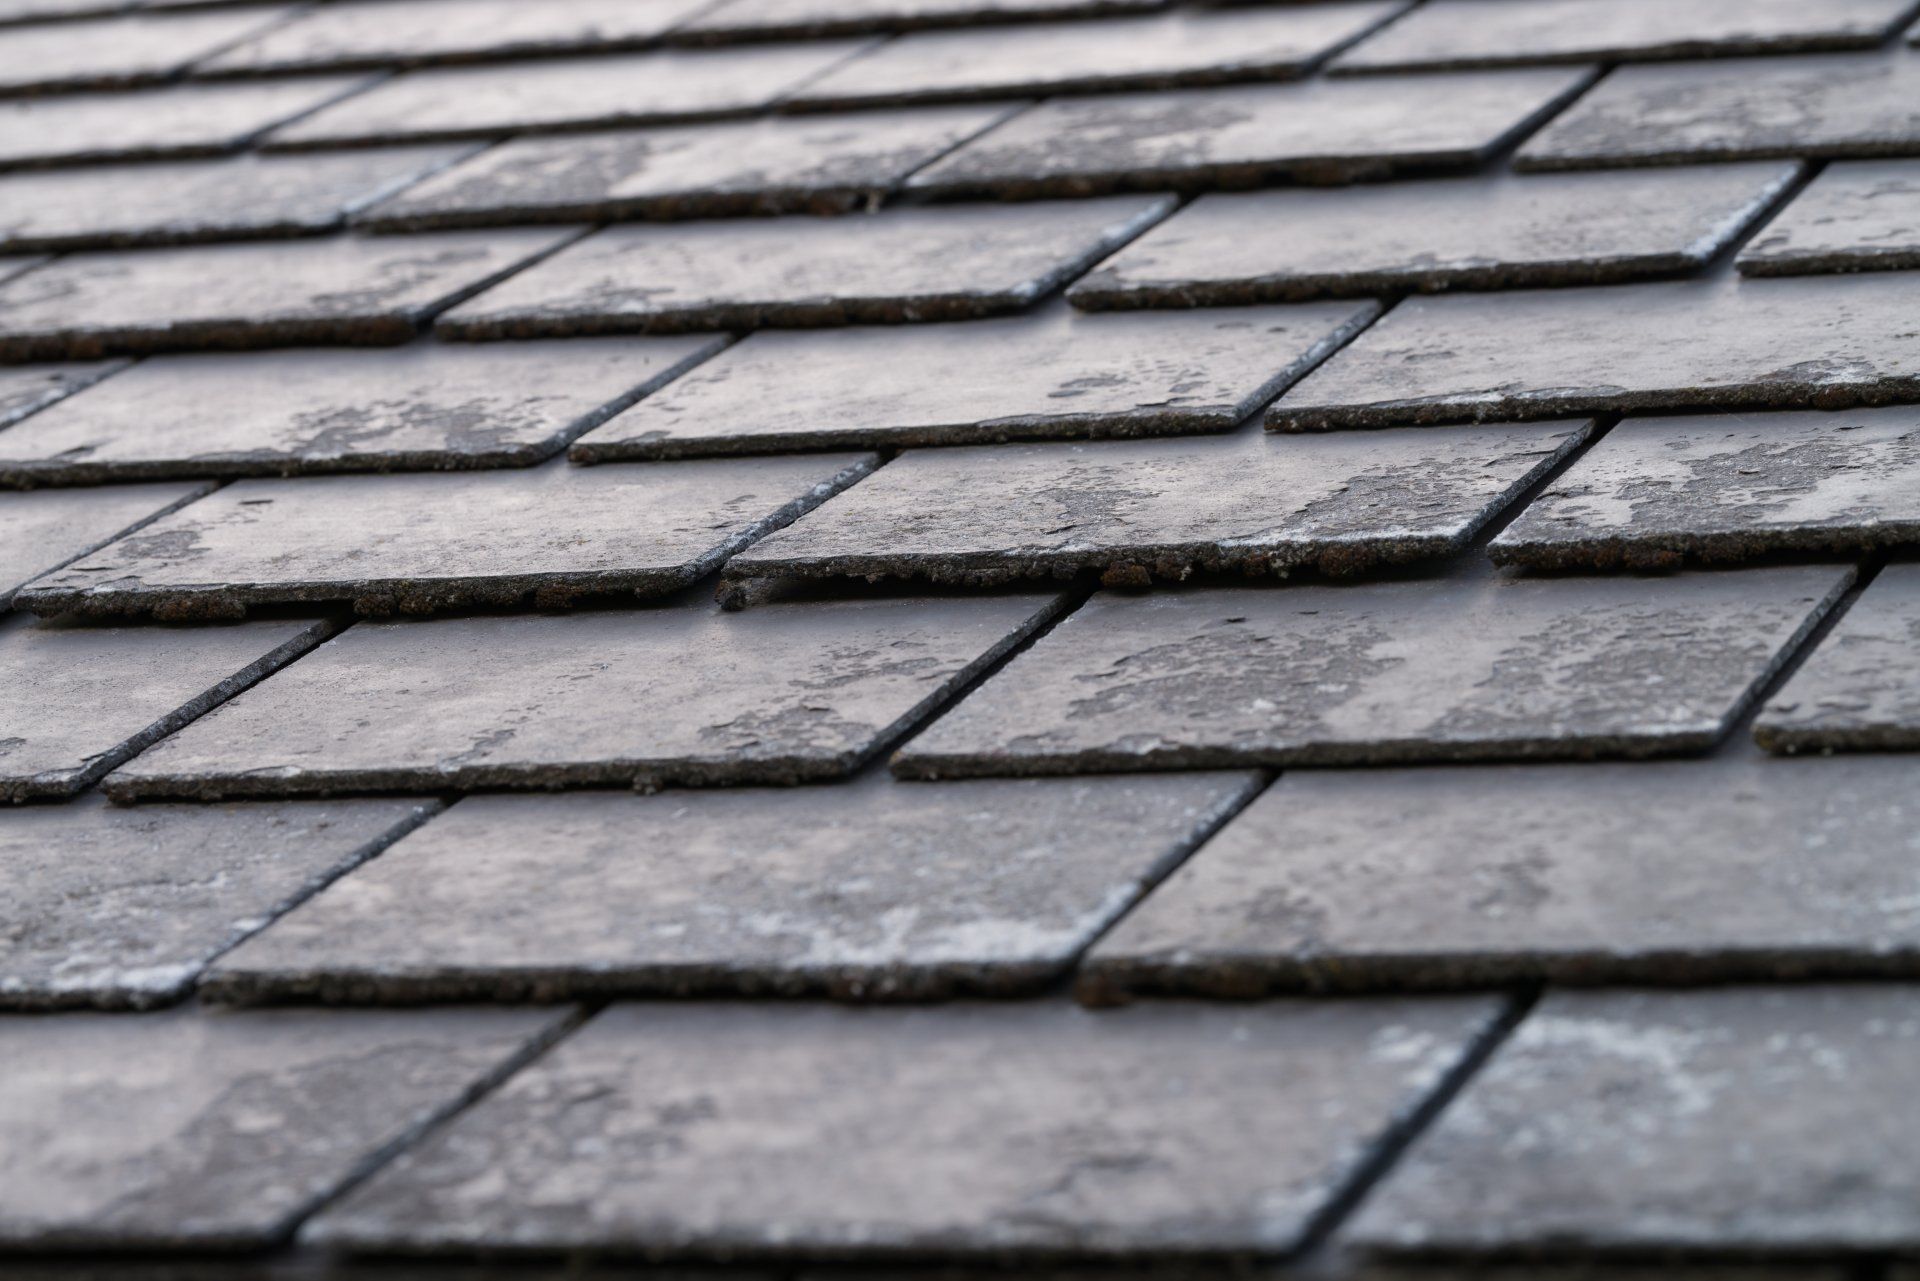 A close up of a roof made of slate tiles.